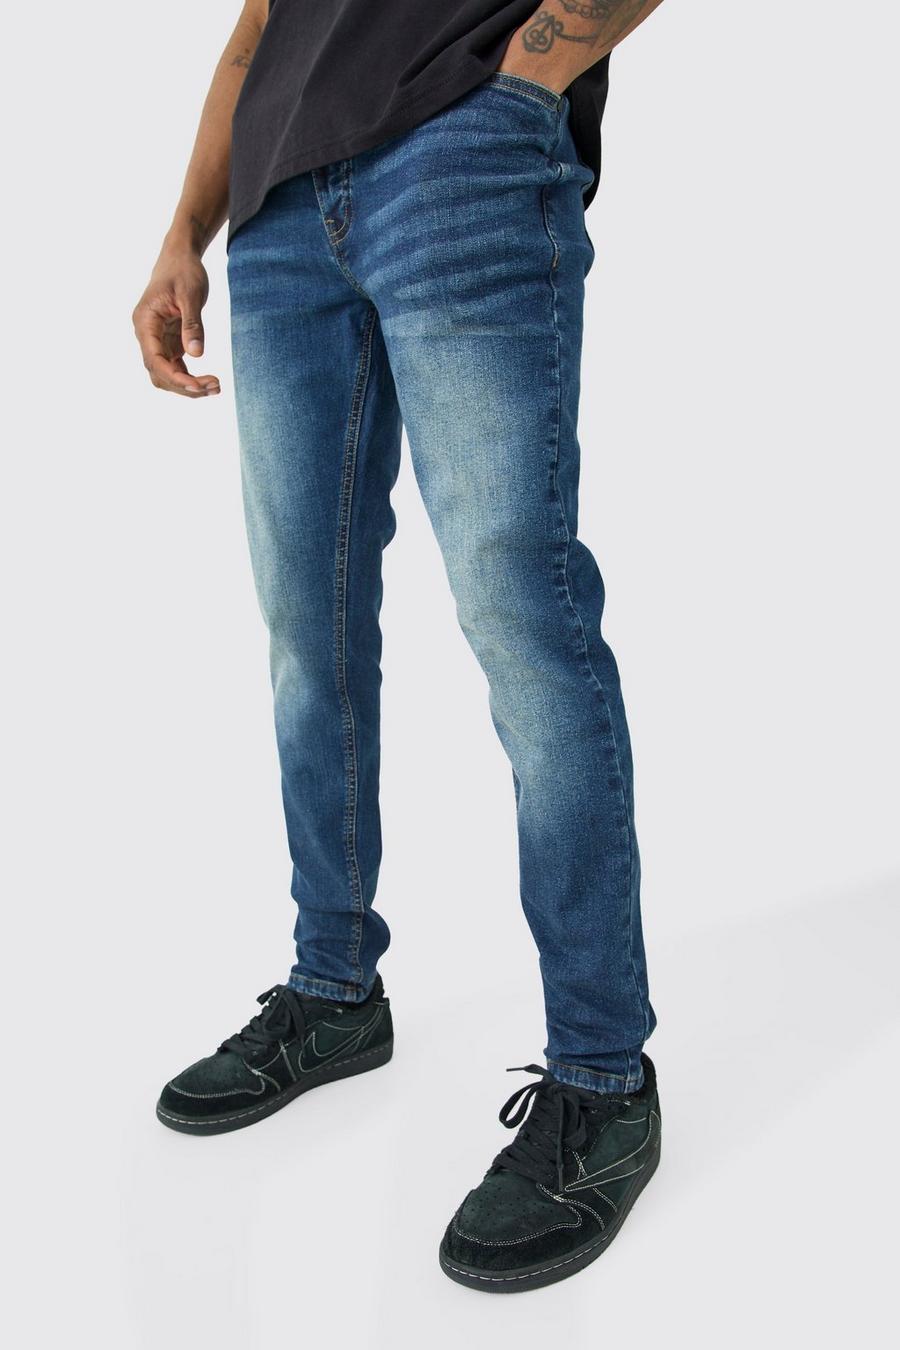 Jeans Tall Skinny Fit Stretch in blu antico, Antique blue image number 1